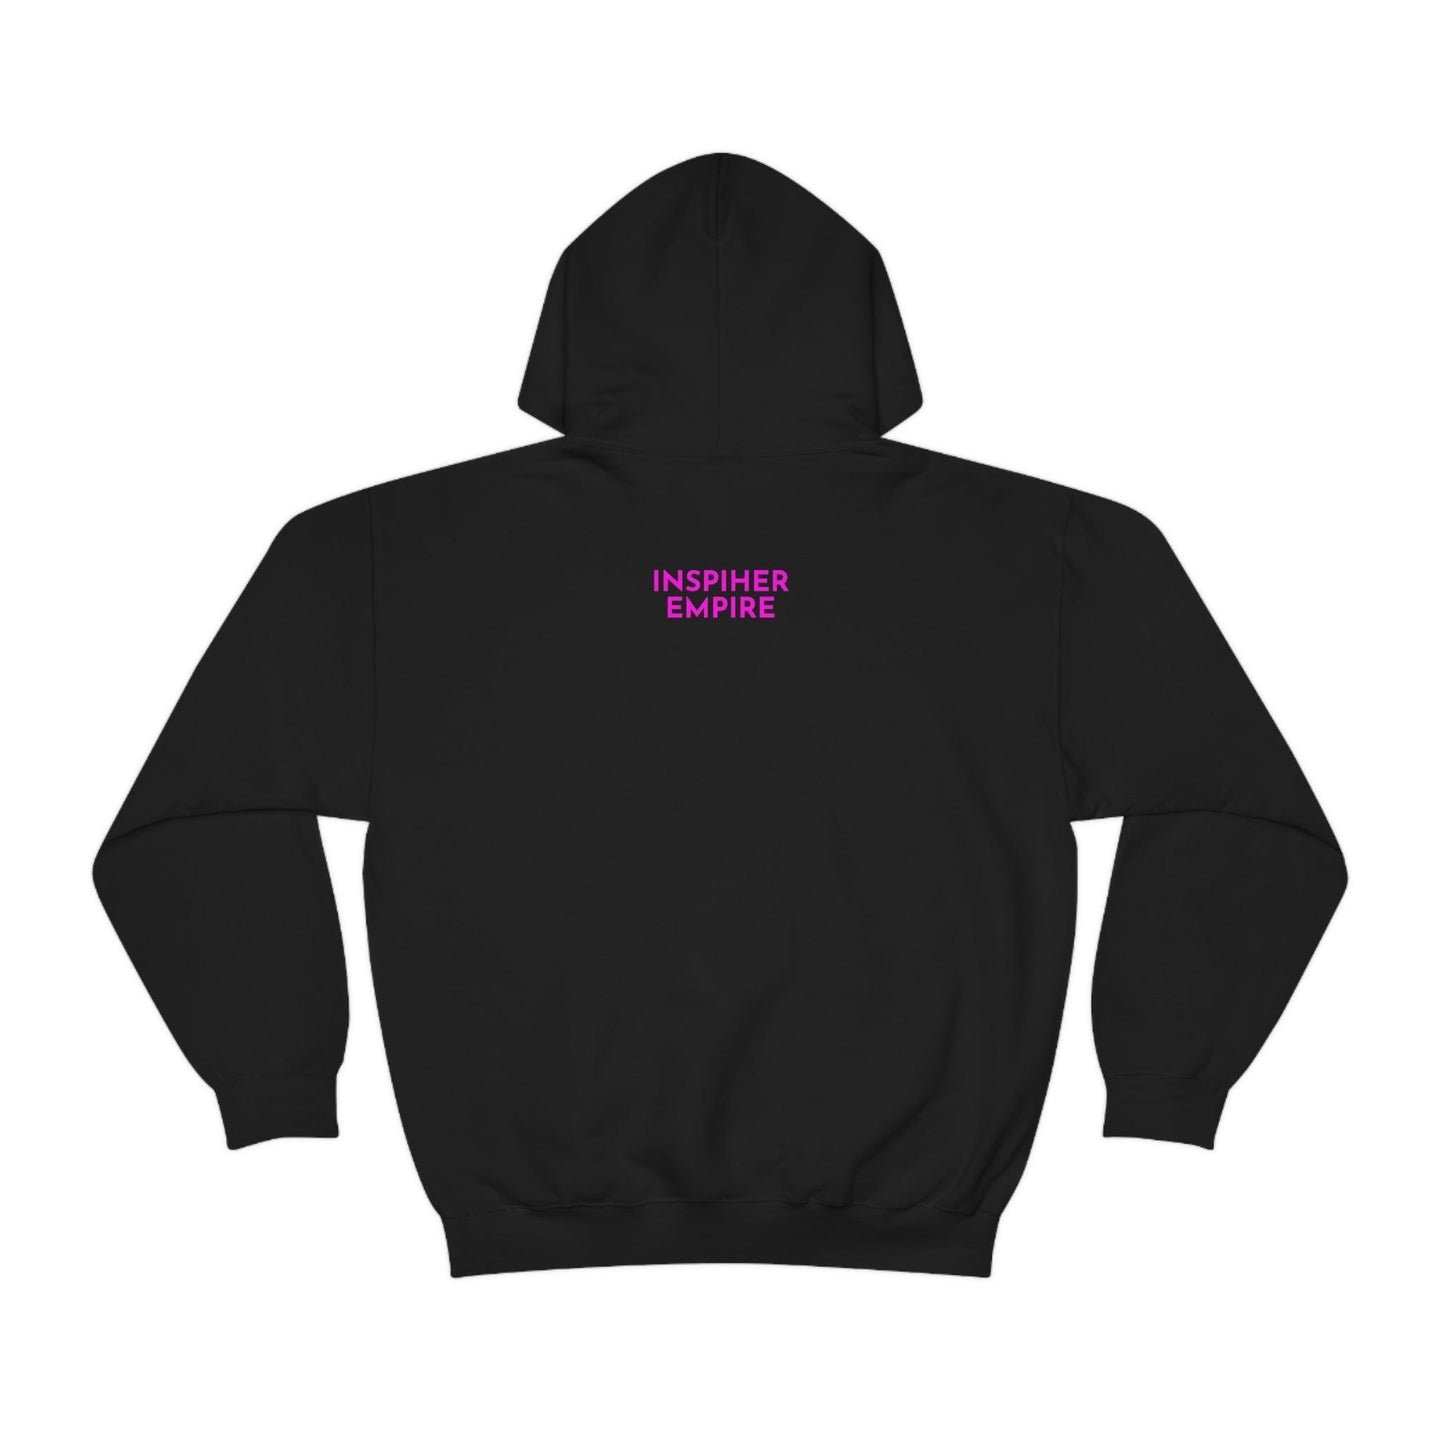 Collaboration Over Competition Hoodie